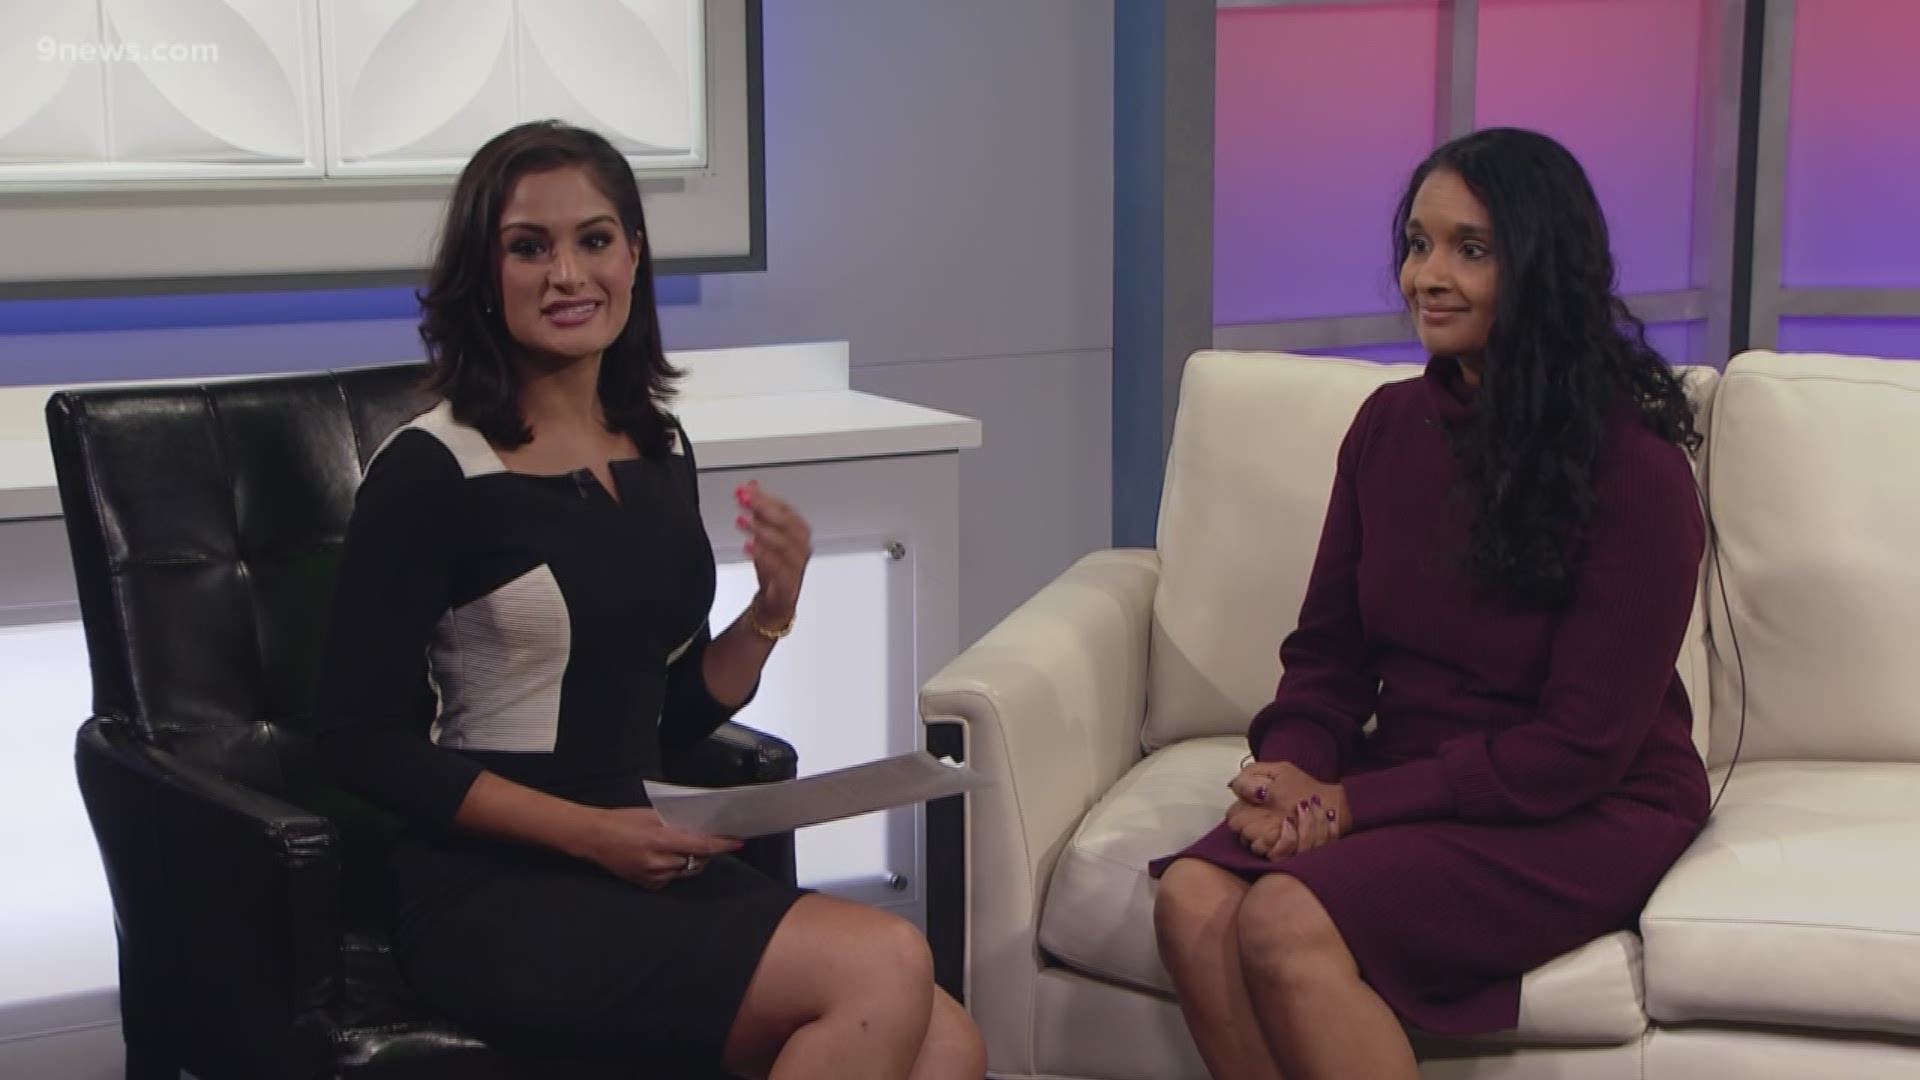 9Health is all about prevention. Getting preventive health checks greatly improves your health and you can get them done this fall at a 9Health Fair. We talked more with Dr. Tista Ghosh, VP of Health Strategy at 9Health.